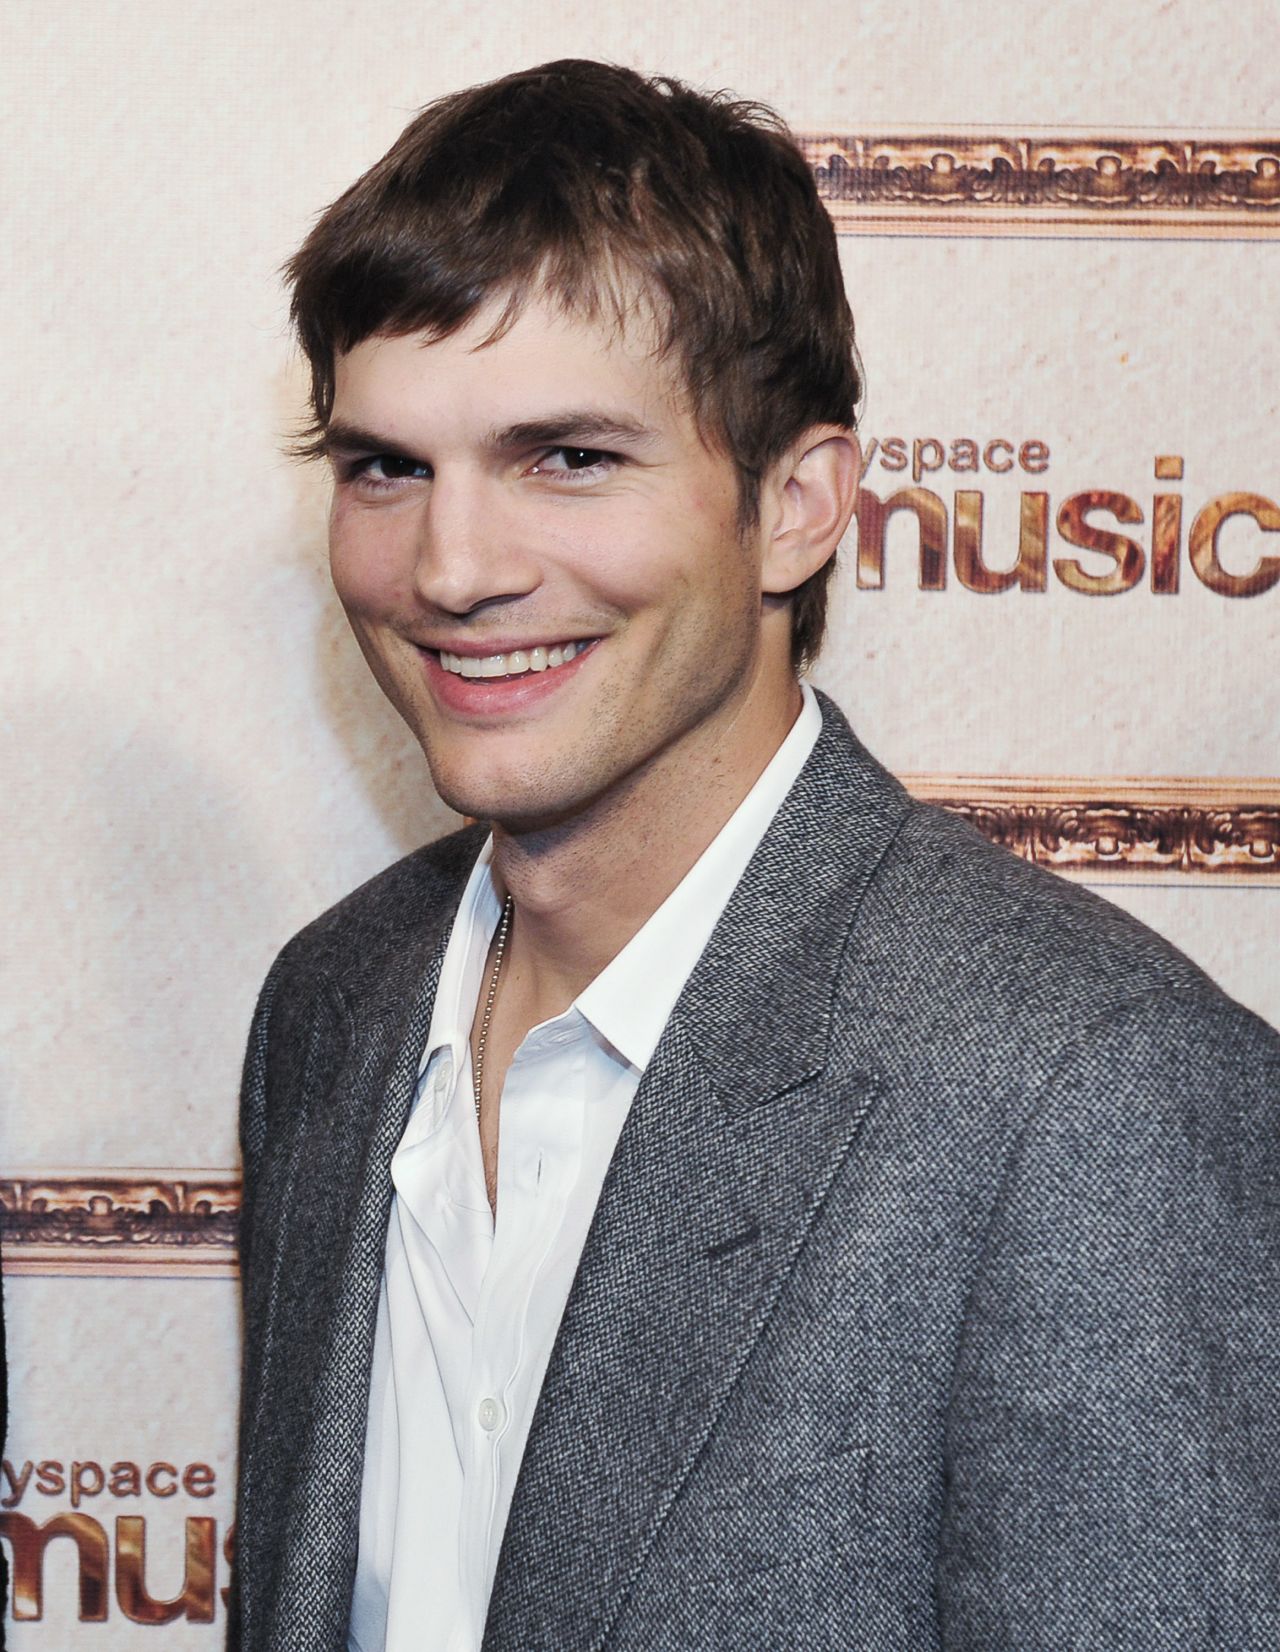 Ashton Kutcher is also active in the tech world. He was an early investor in Skype and continues to back startups through his venture capital firm, A-Grade Investments. 